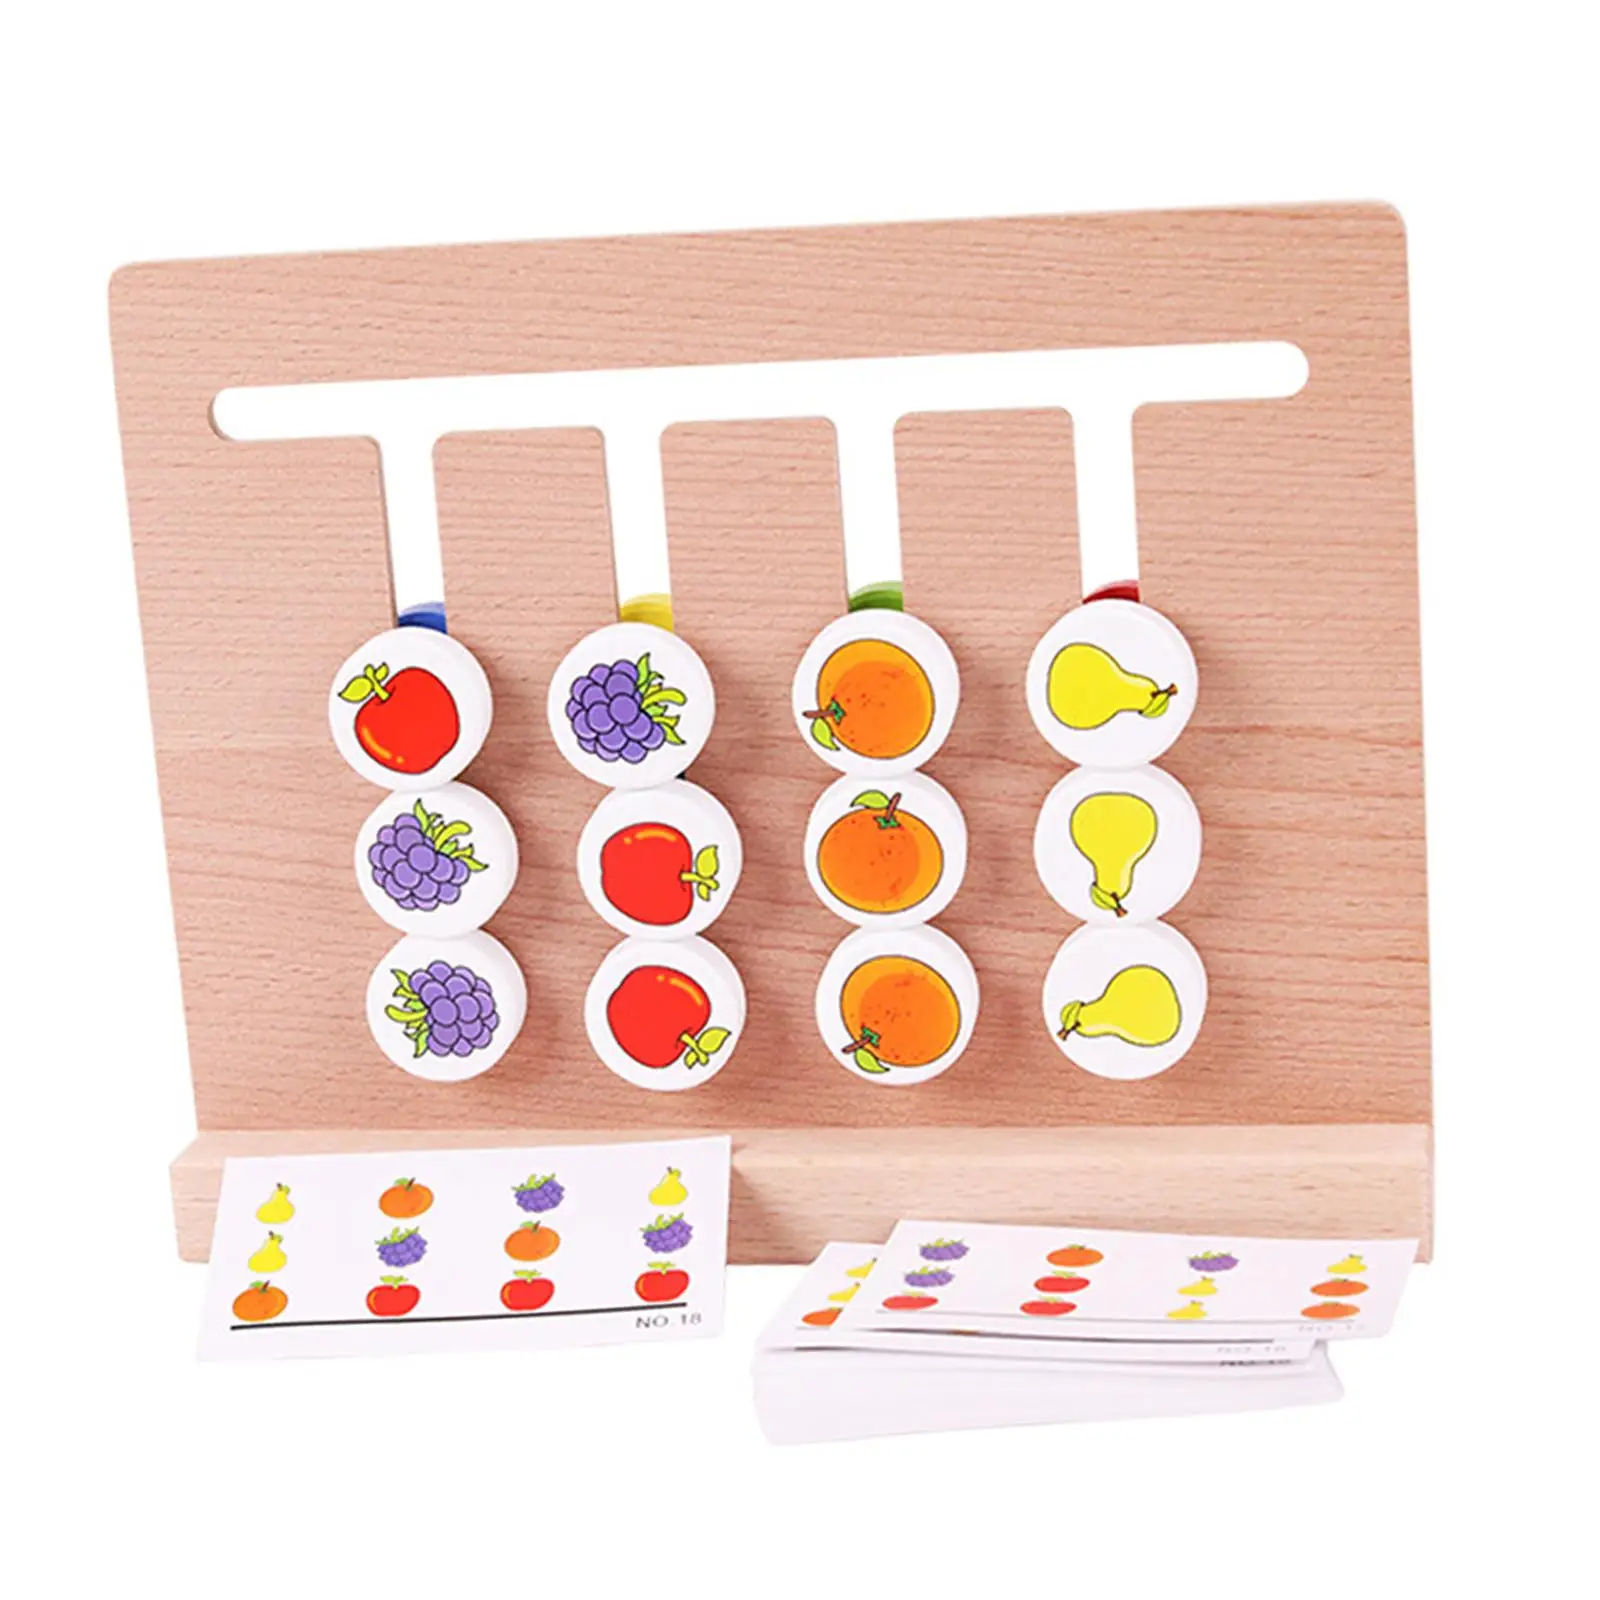 Matching Logical Game Birthday Gifts Developmental Toy Cognition Double Sided Color Sort Board for Kindergarten Nursery Toddlers